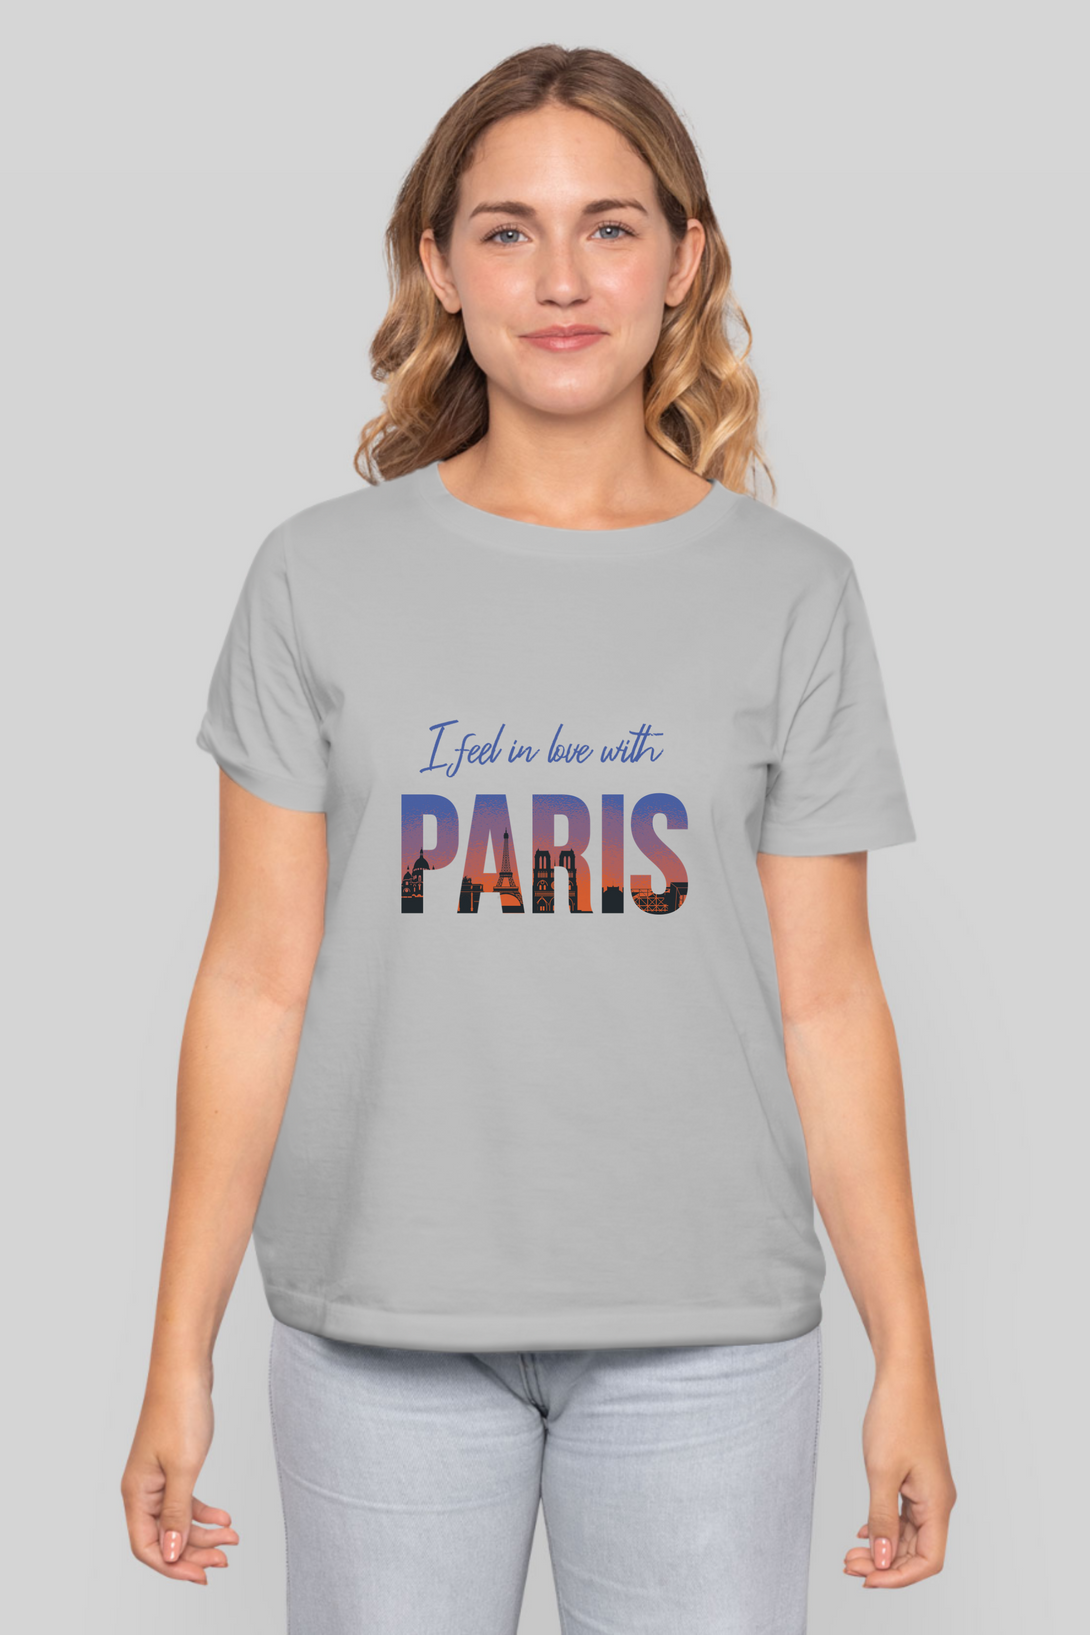 In Love With Paris Printed T-Shirt For Women - WowWaves - 9